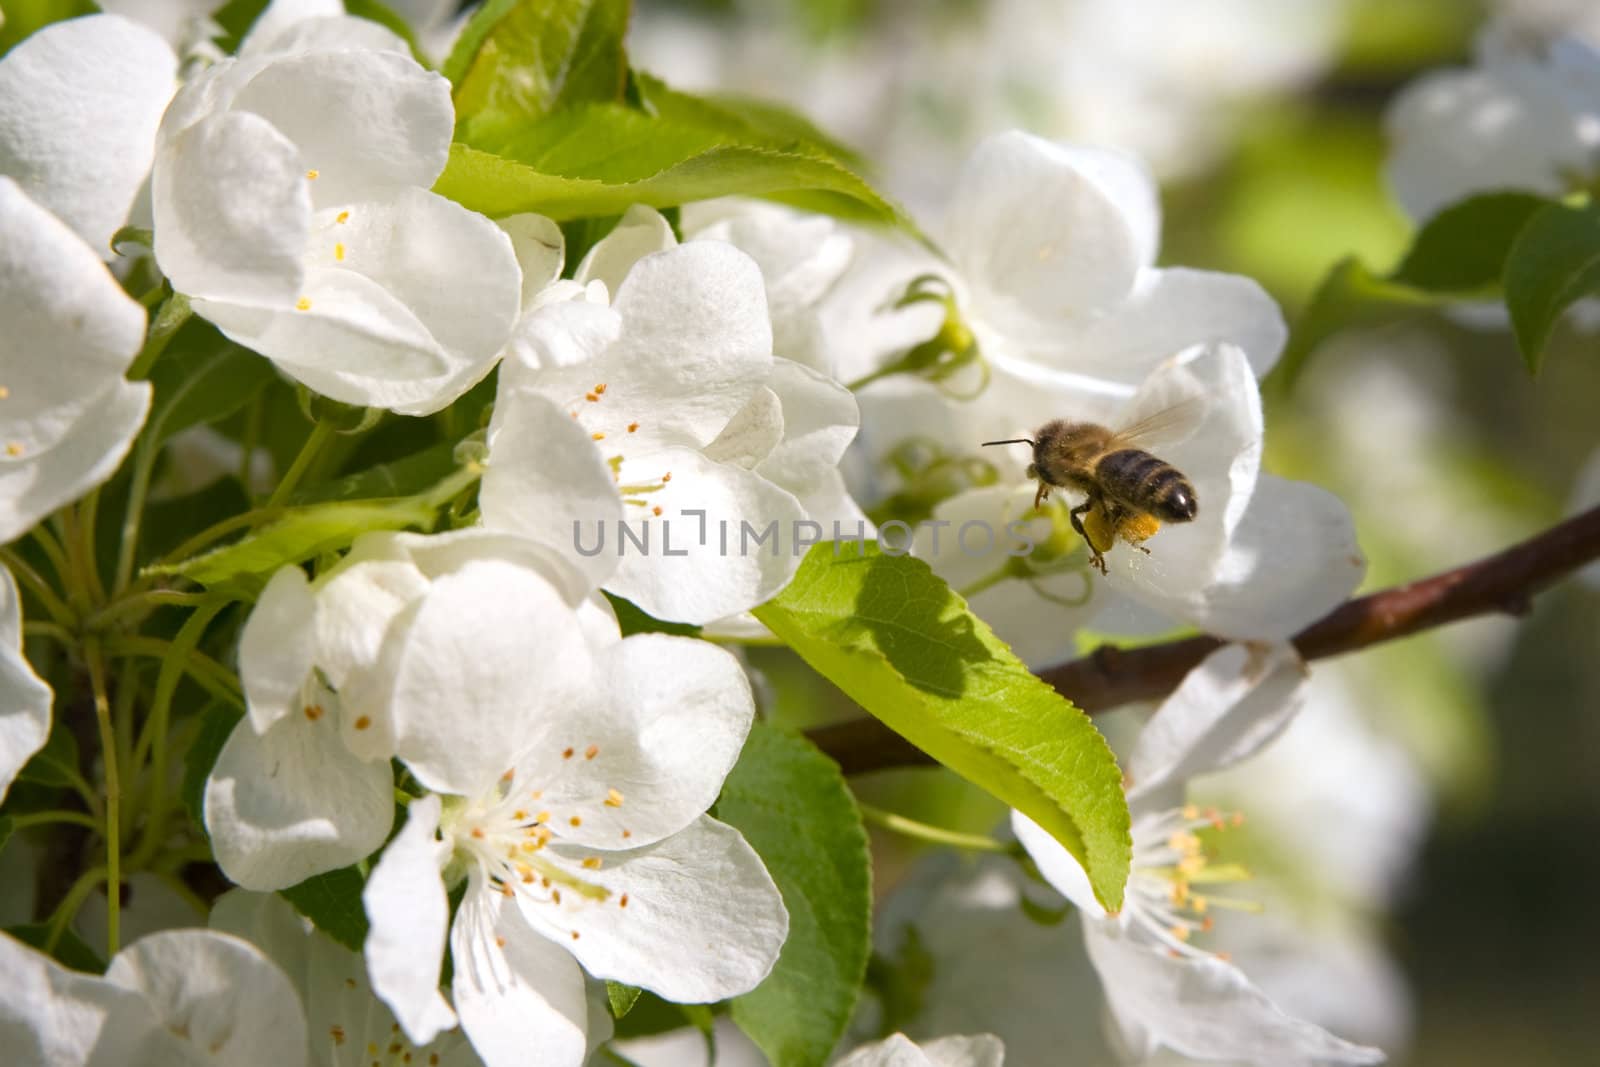  Bee on a blossoming branch of an apple-tree